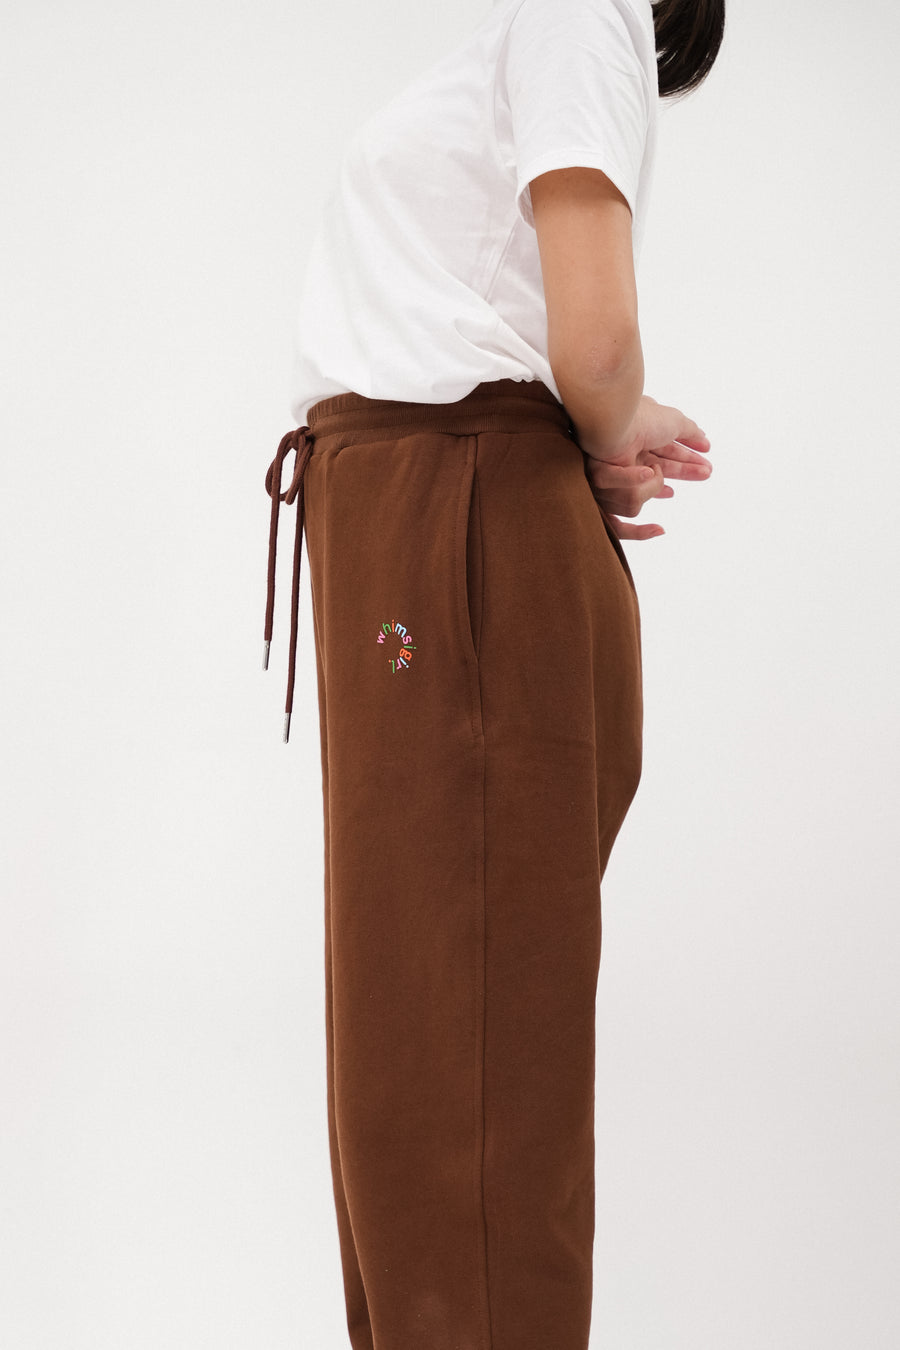 Pick-Me-Up Jogger in Caramel